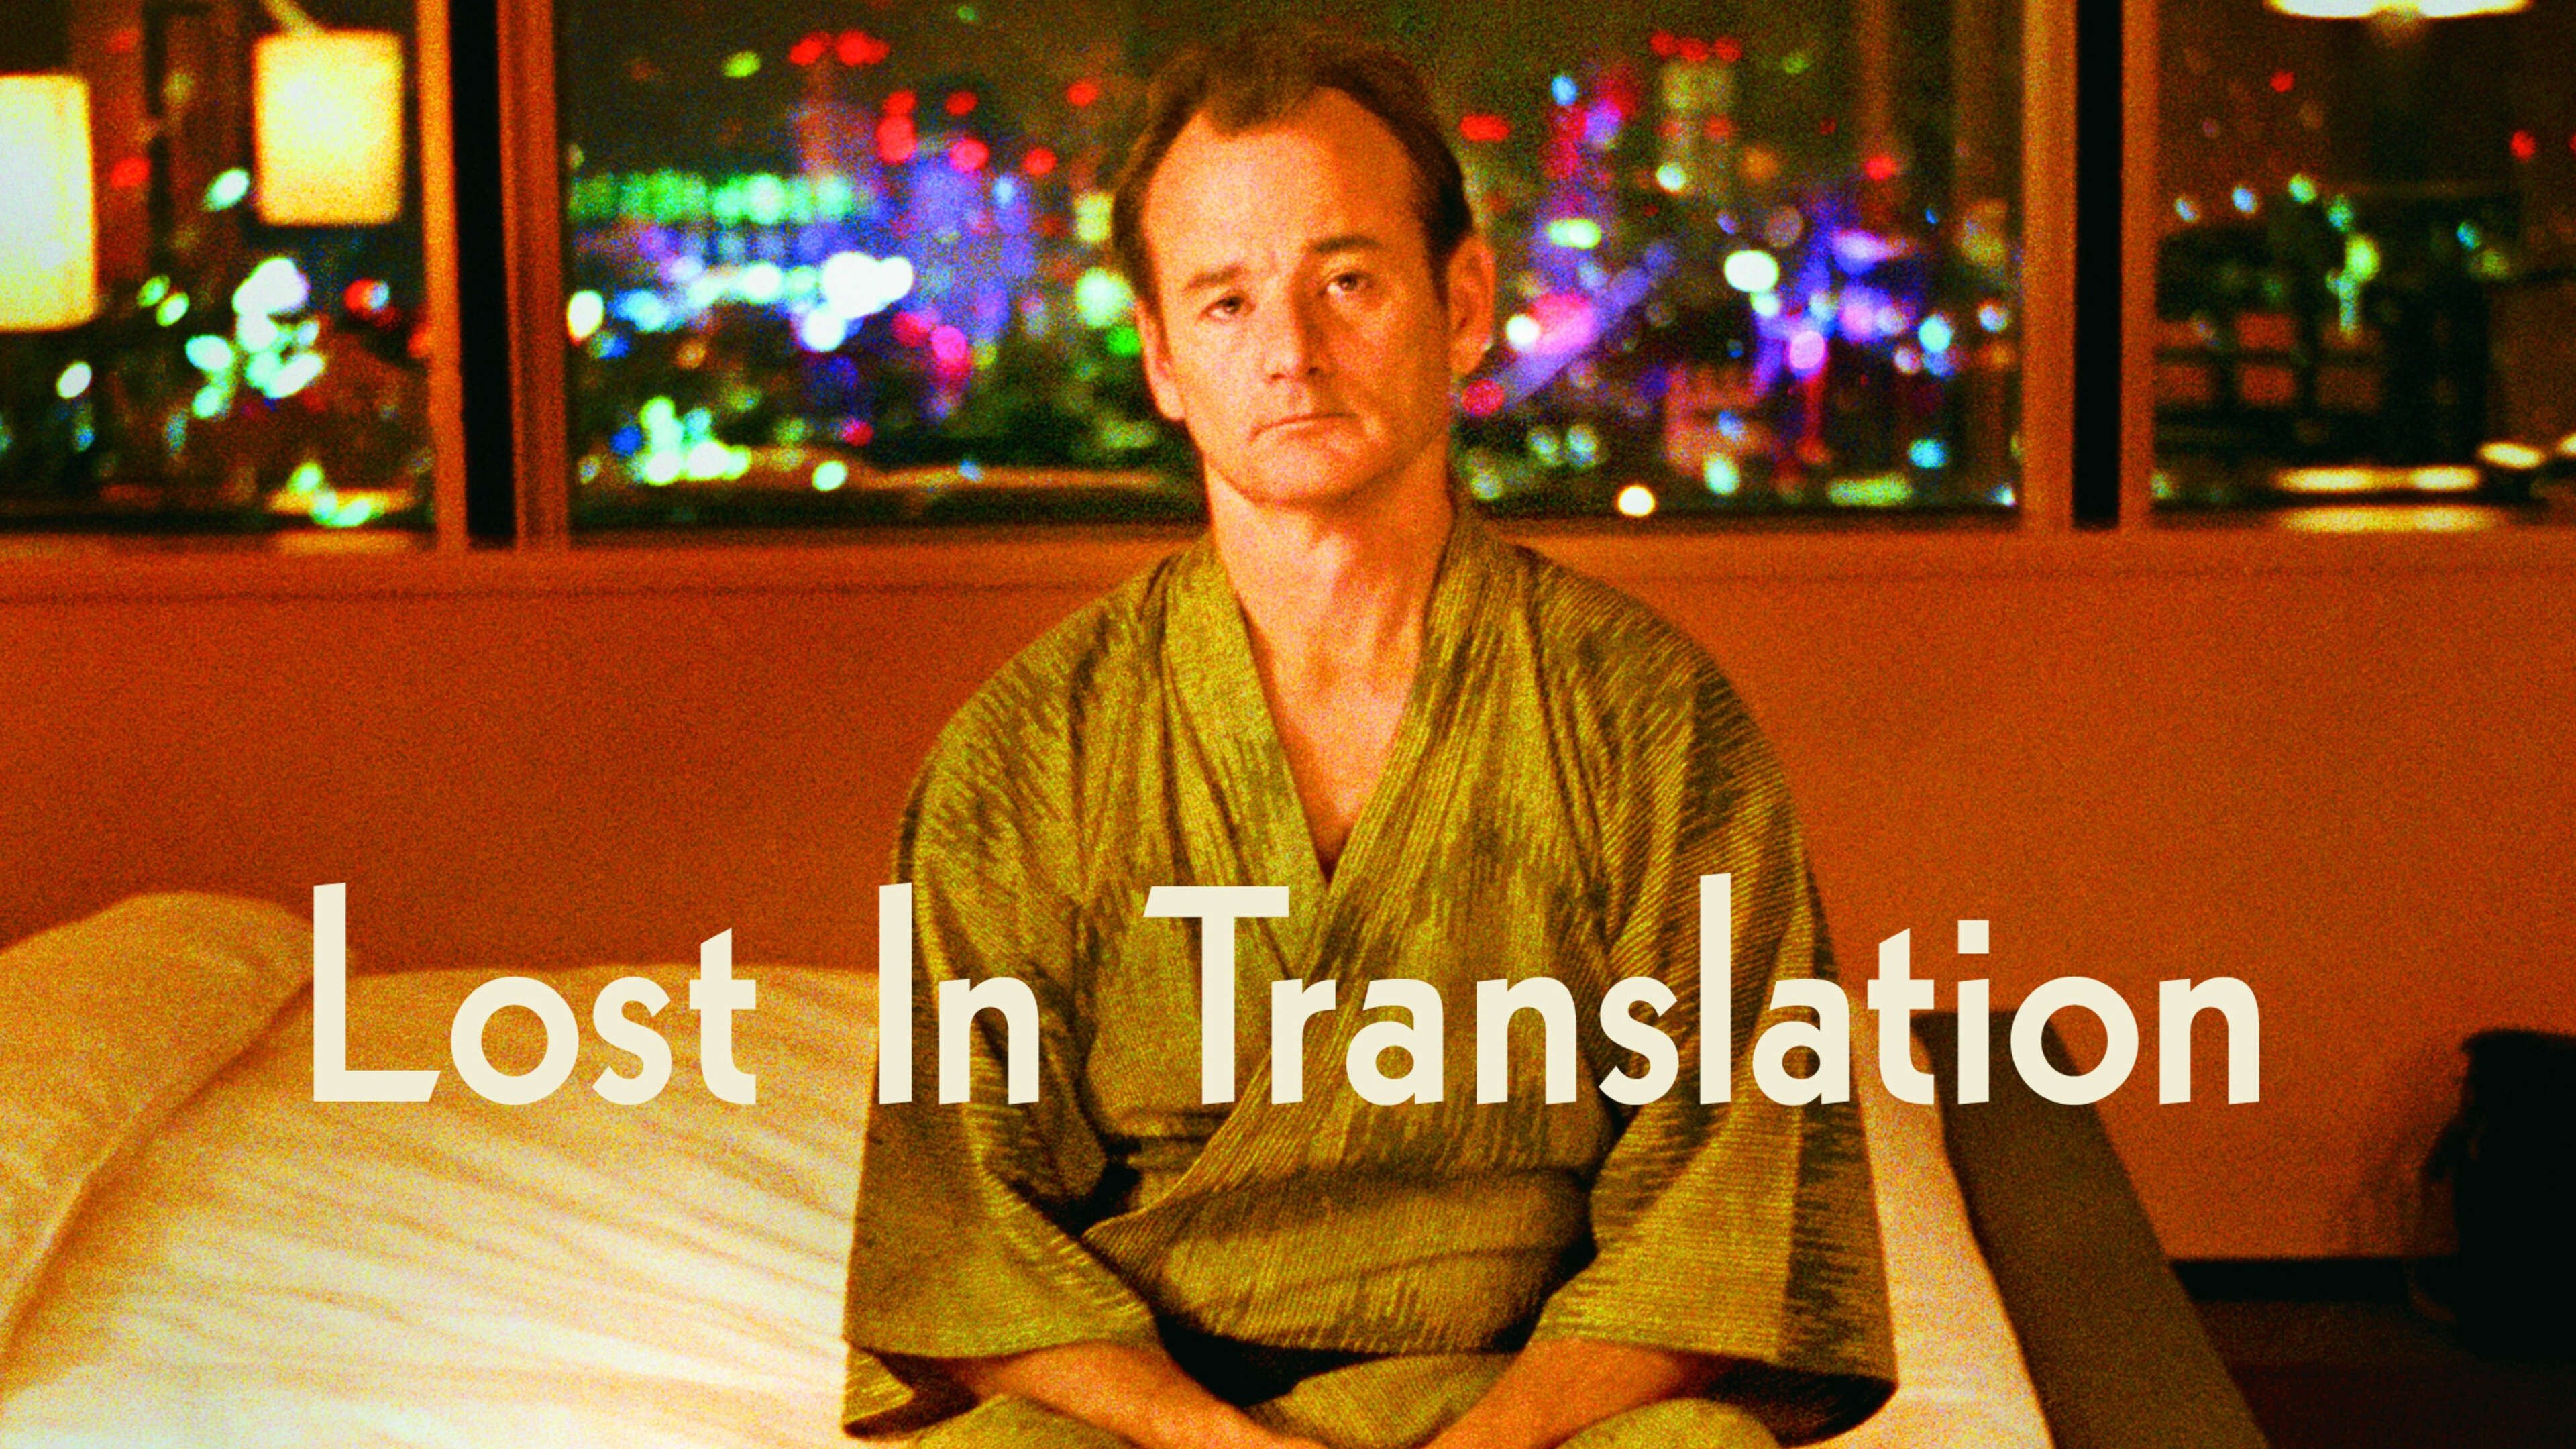 bobby leach recommends Watch Lost In Translation Free Online